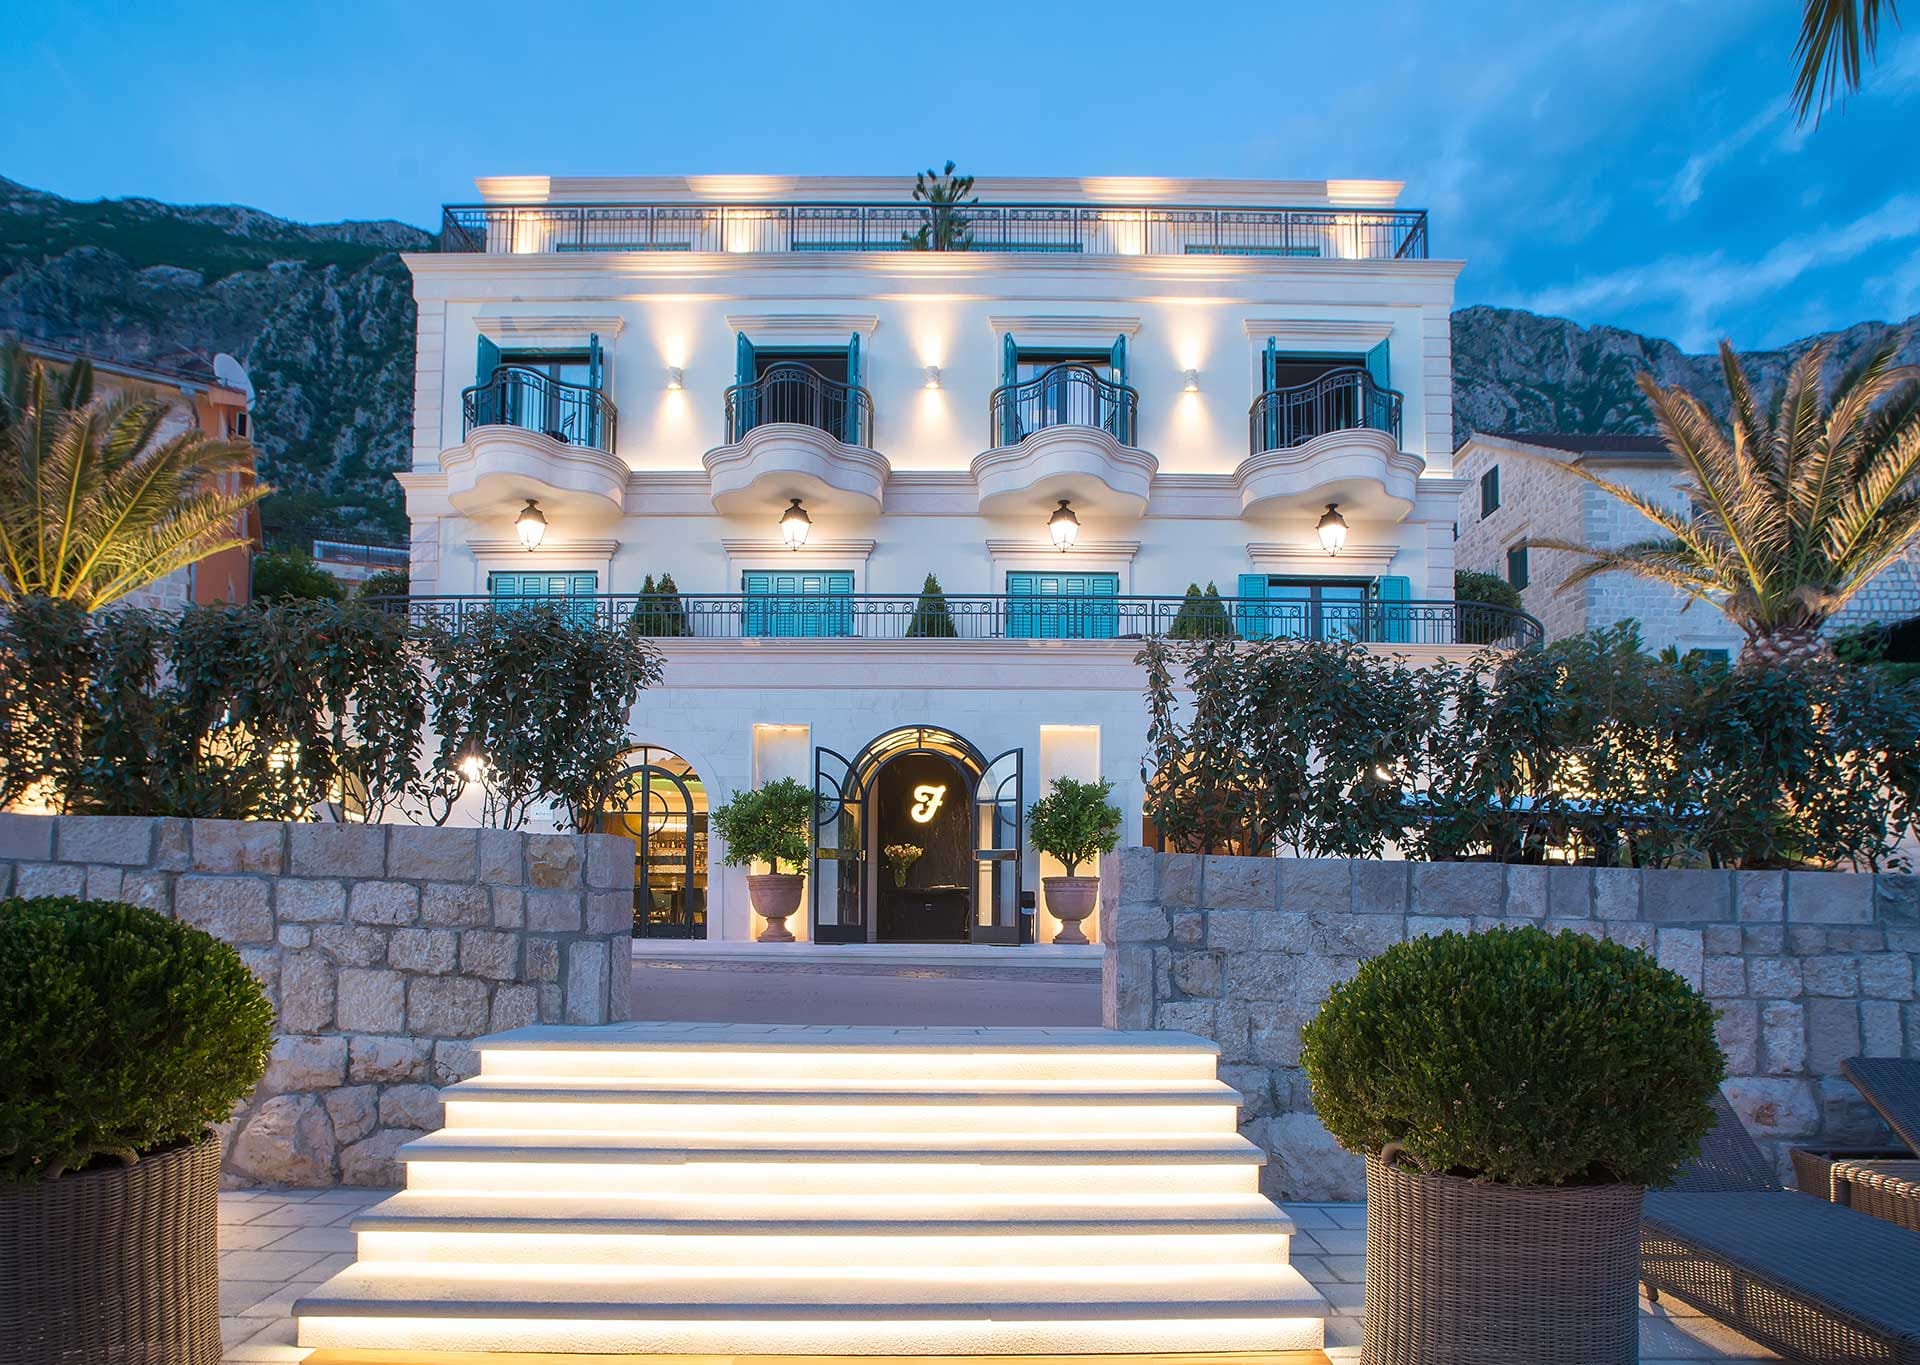 Venetian palace style frontage of Forza Terra Hotel, Montenegro